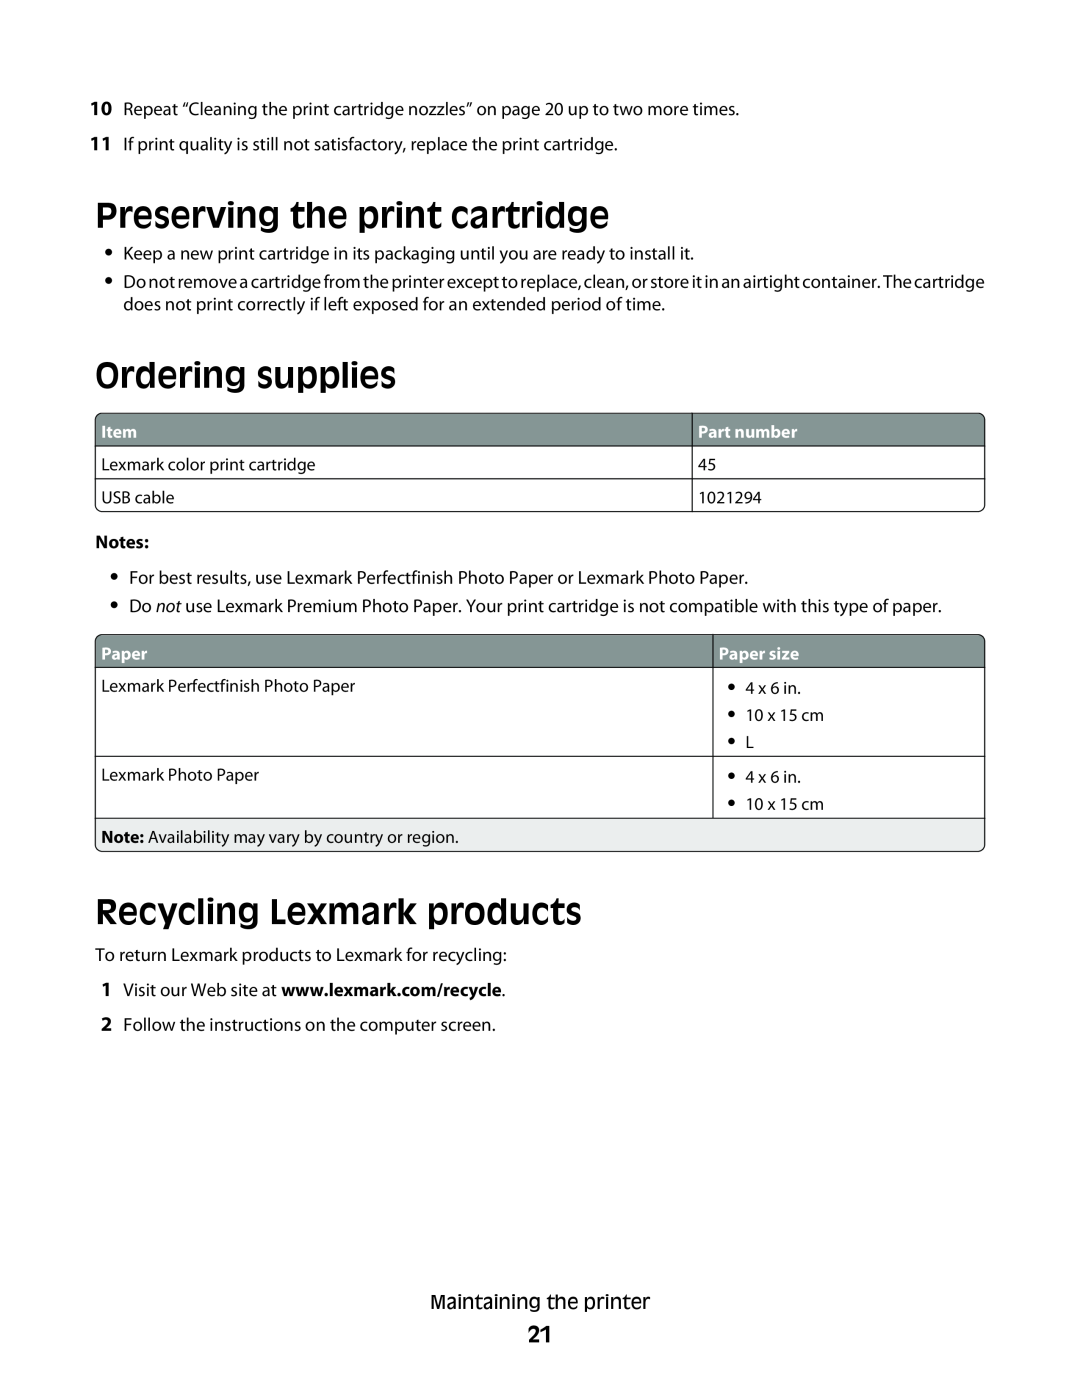 Lexmark P200 Series Preserving the print cartridge, Ordering supplies, Recycling Lexmark products, Part number, Paper 